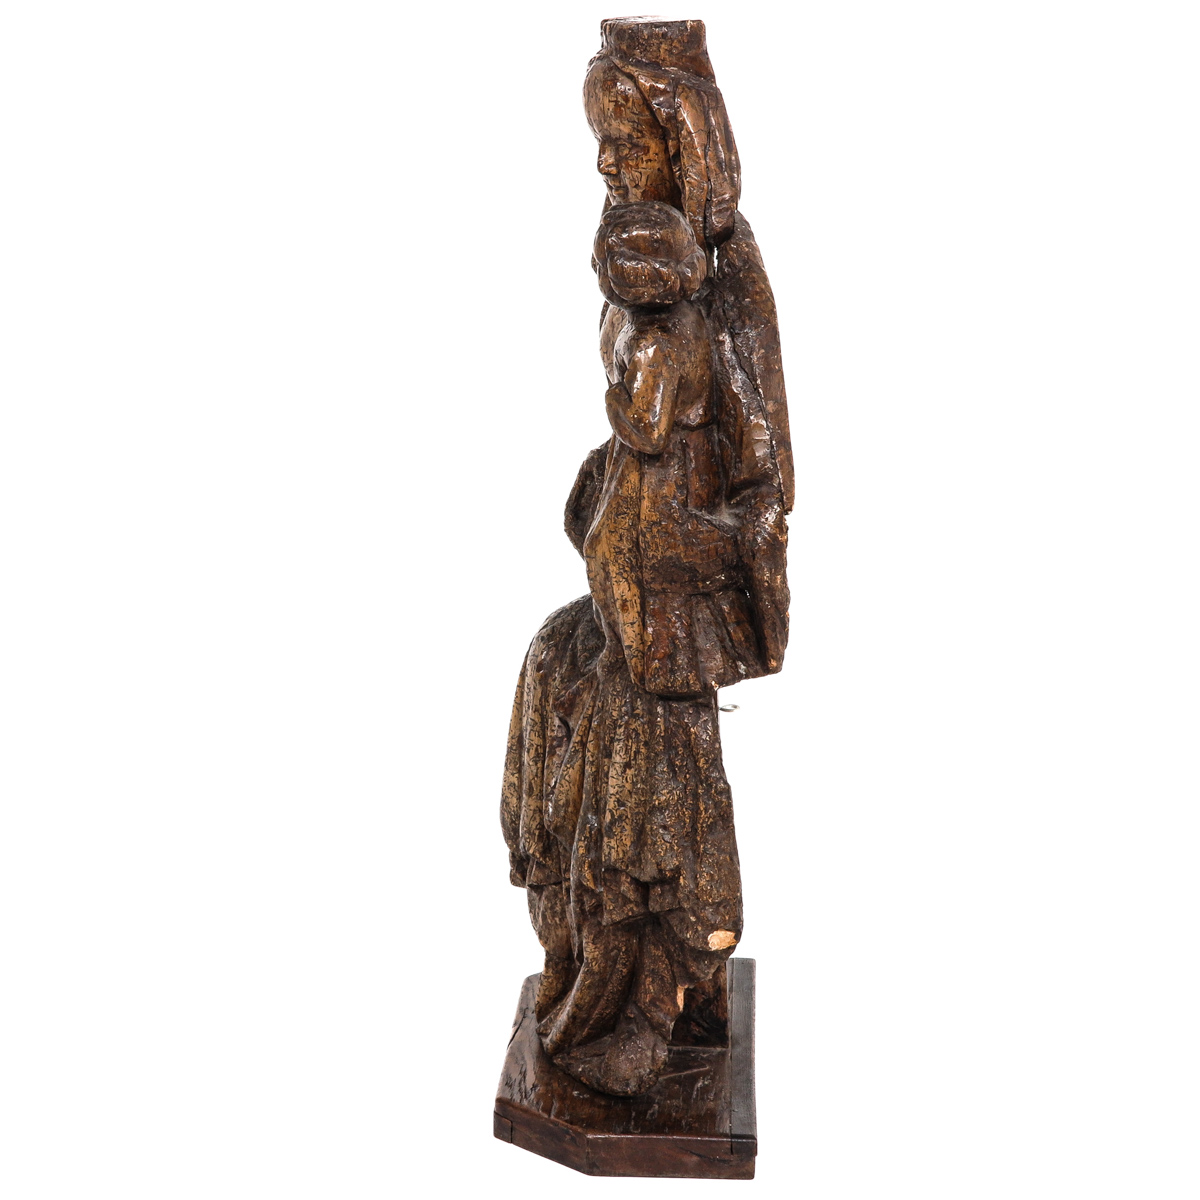 A 14th Century Sculpture of Madonna and Child - Image 2 of 10